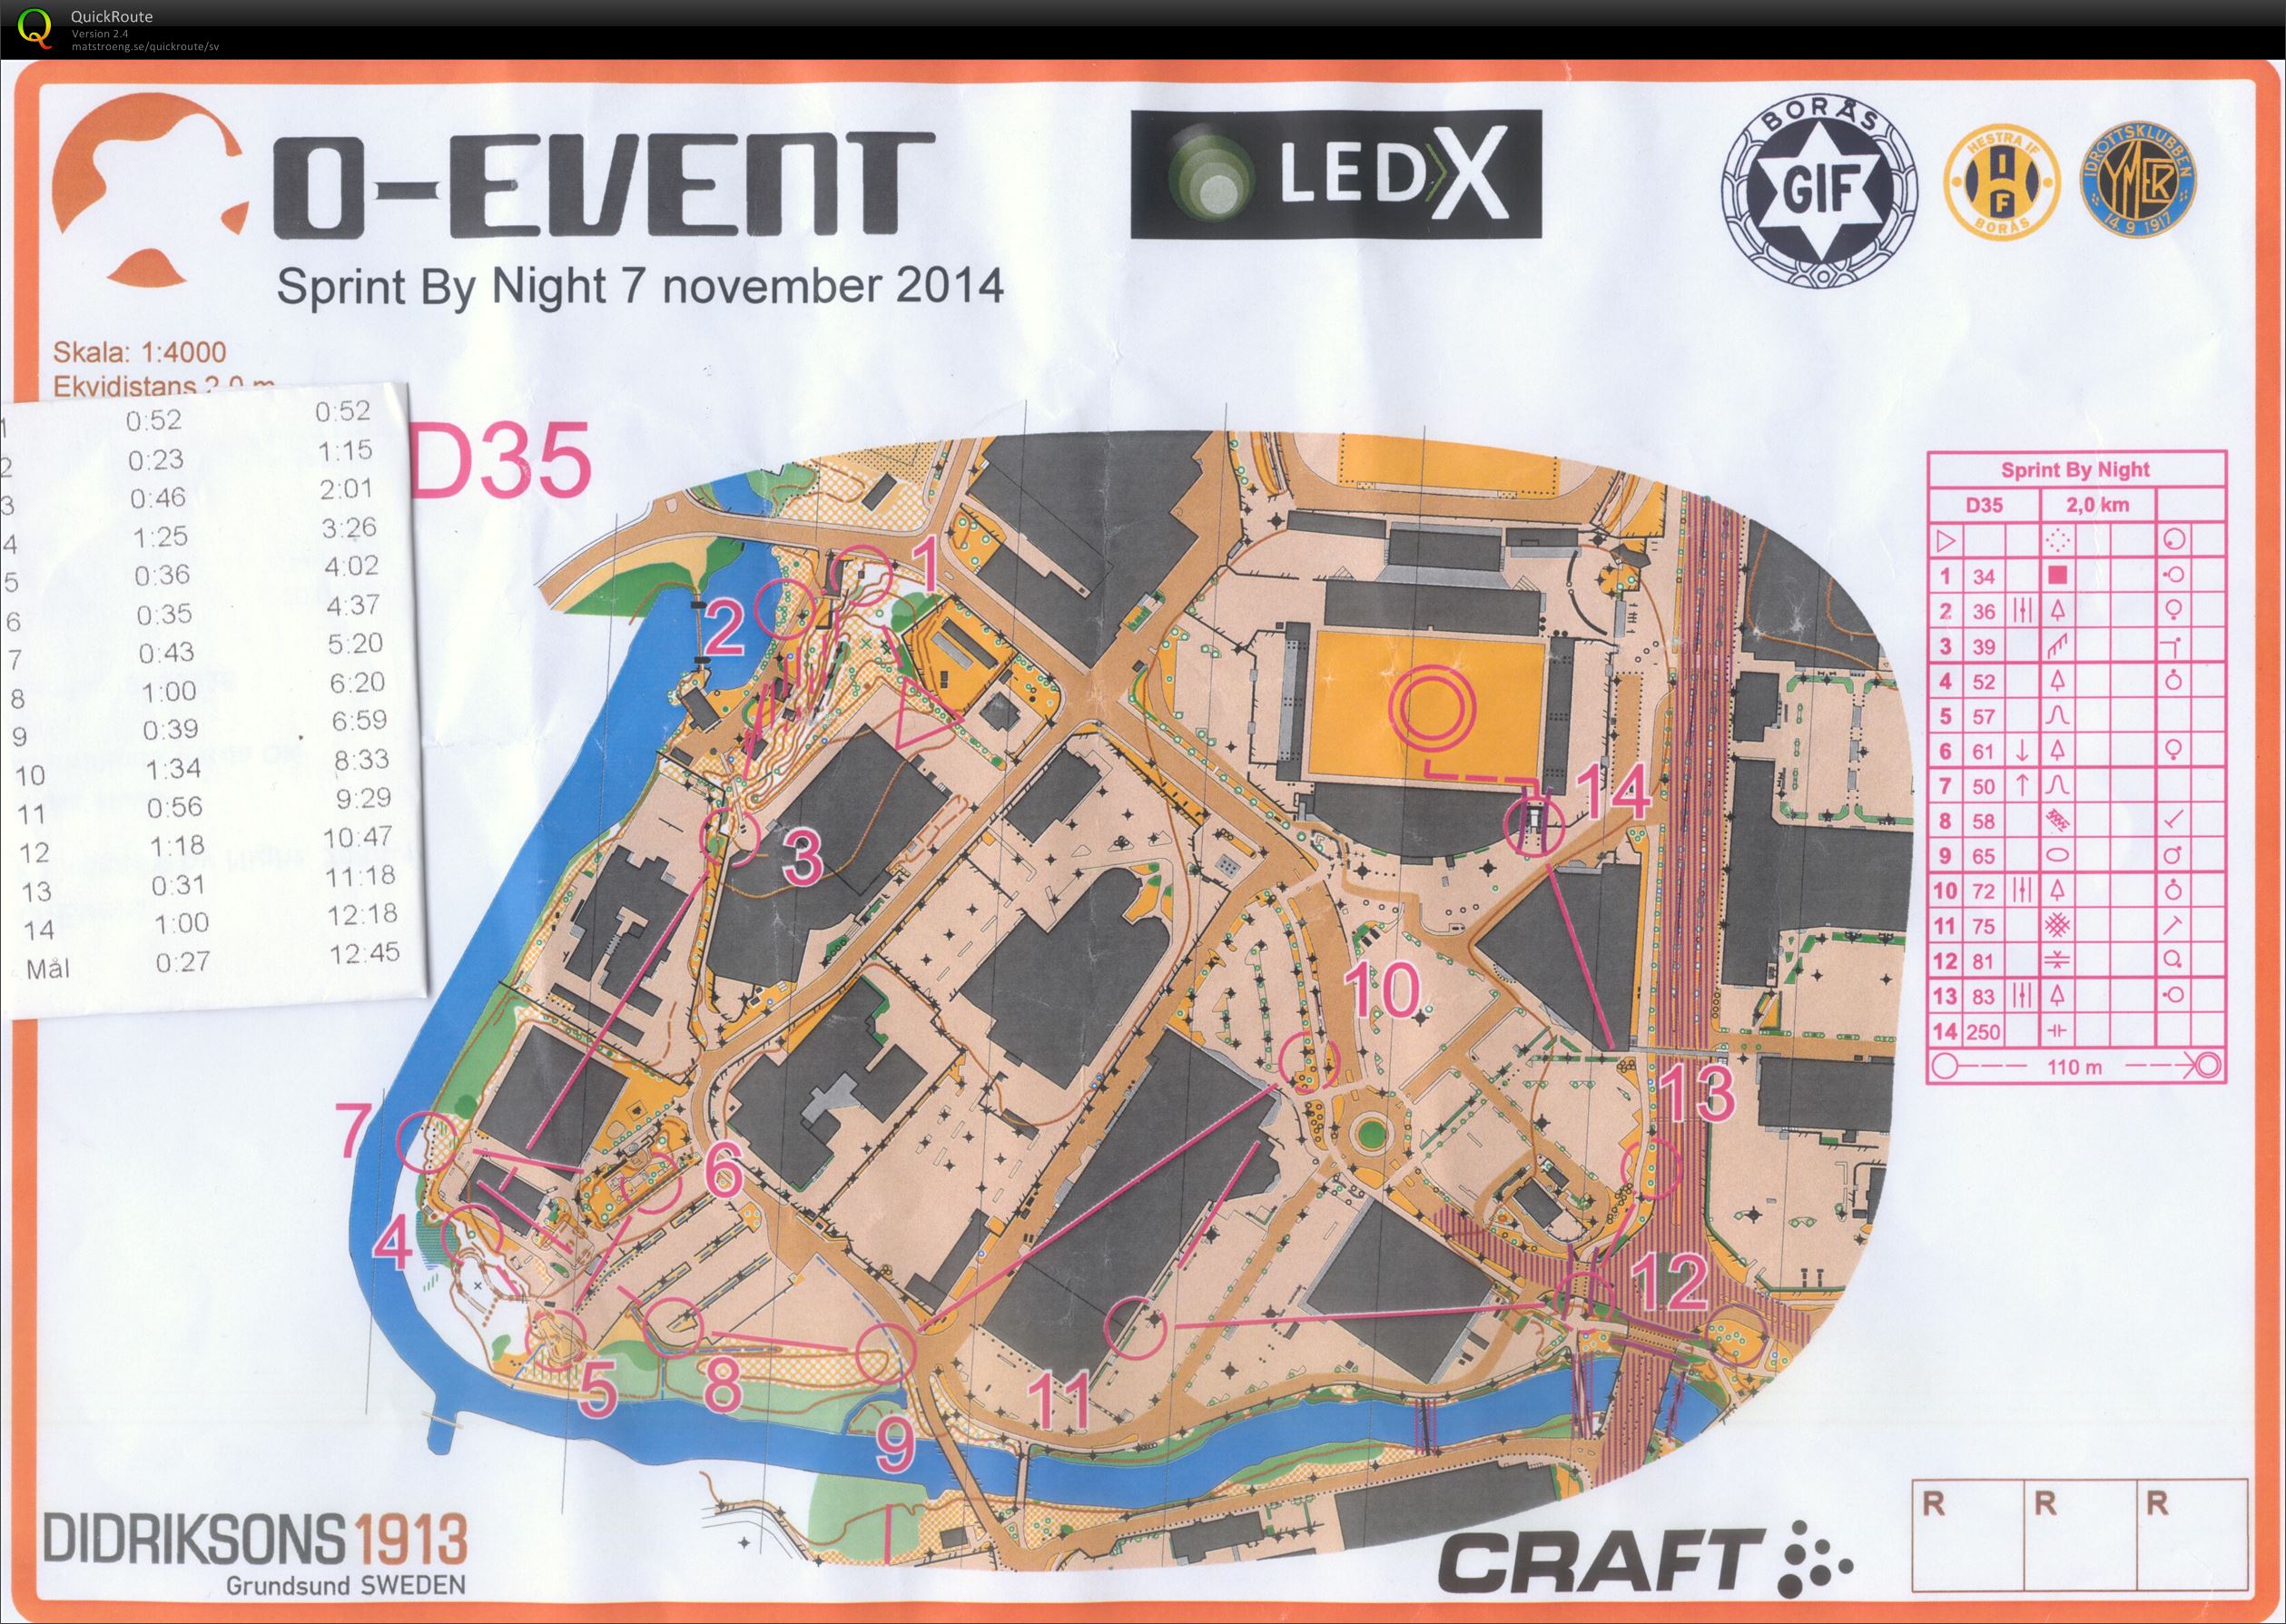 O-event Sprint by Night (D35) (2014-11-07)